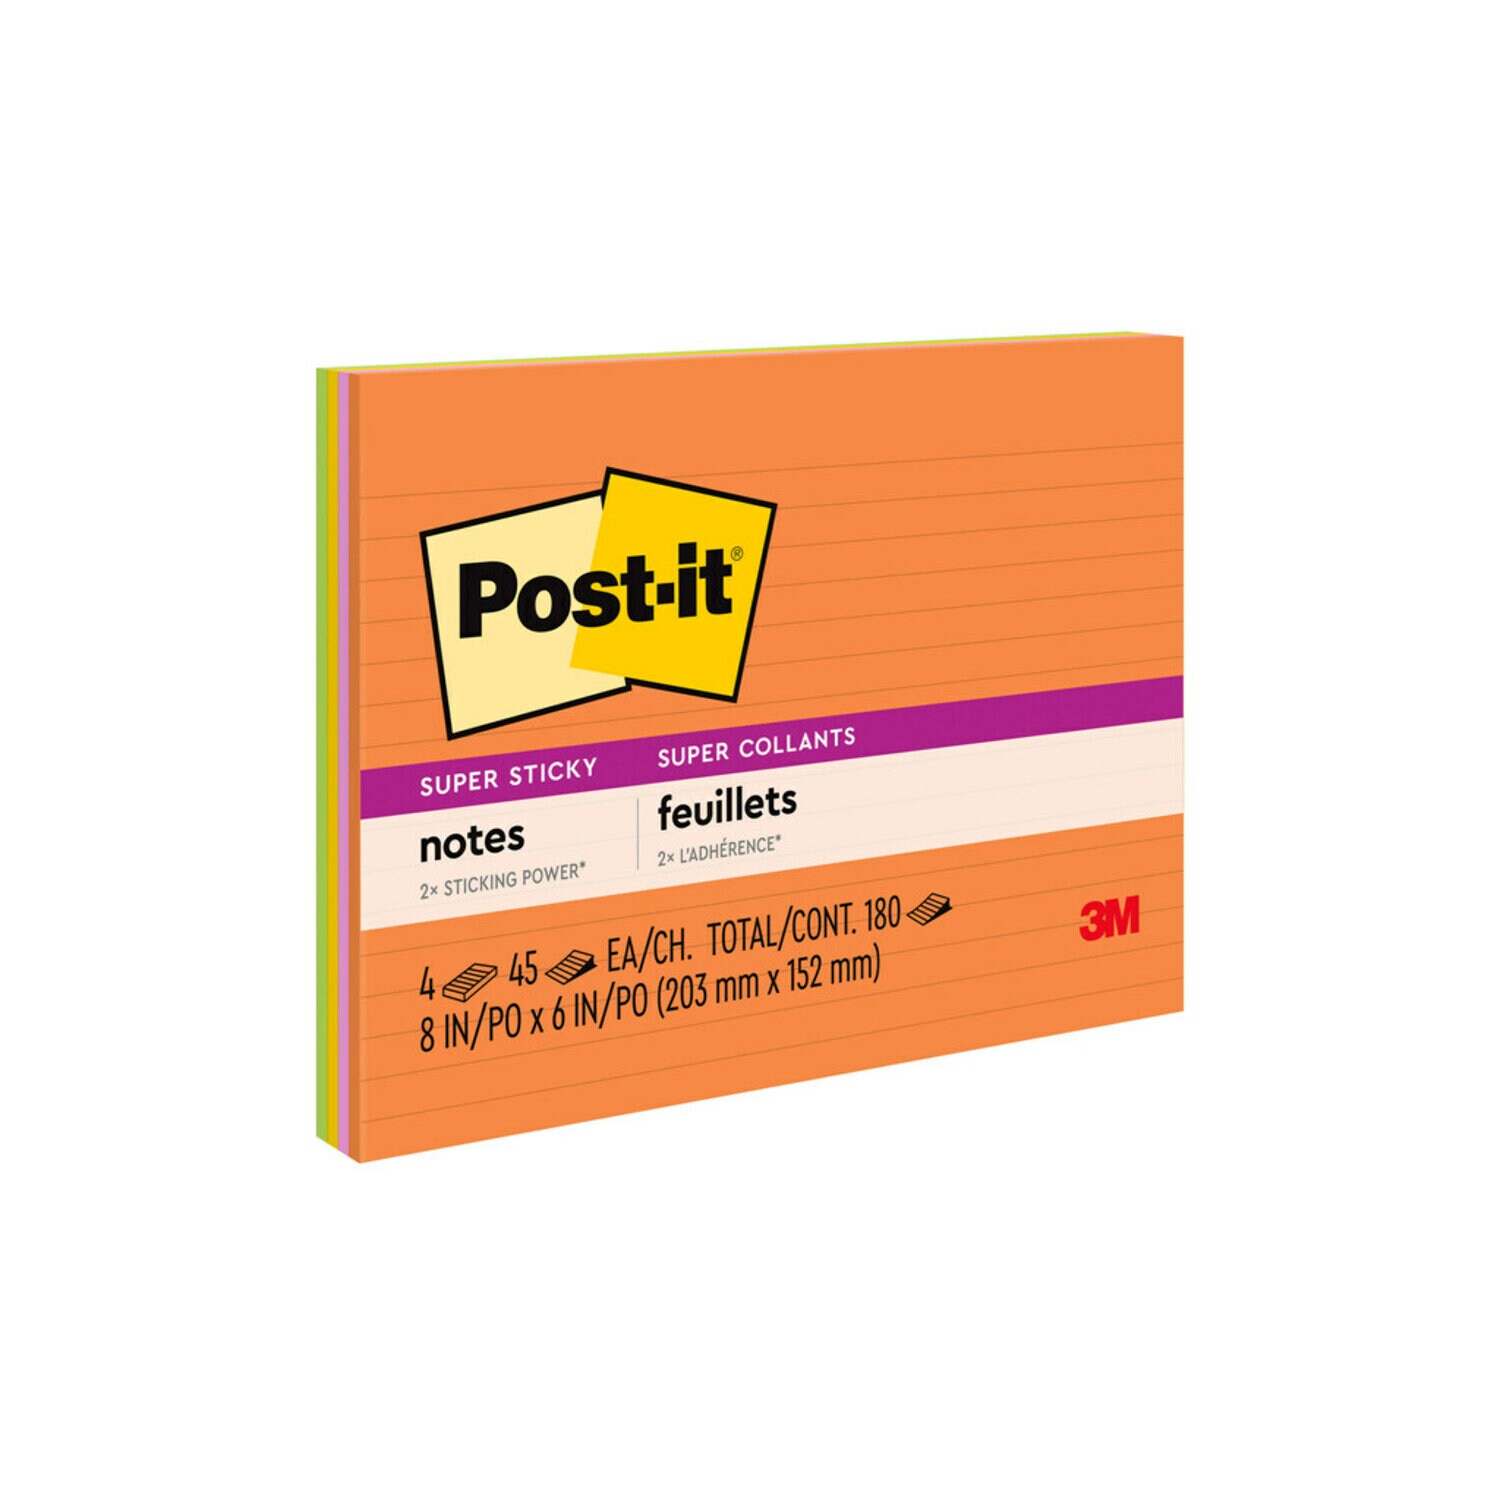 7100230167 - Post-it Super Sticky Notes 6845-SSPL, 8 in x 6 in (203 mm x 152 mm), Energy Boost Collection